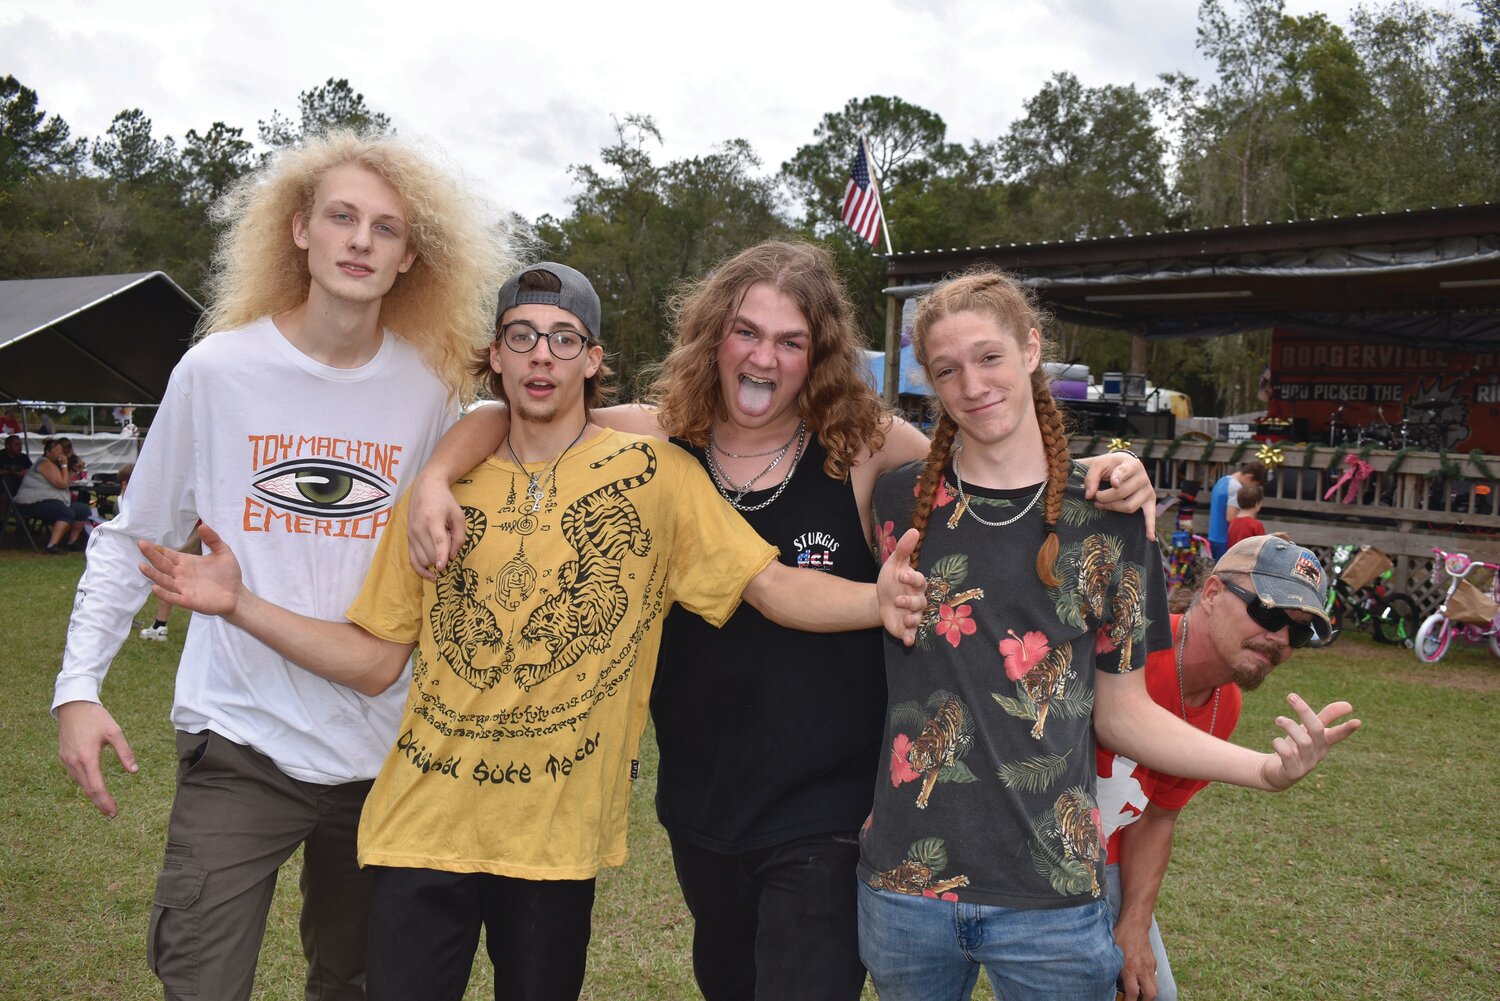 CBD members (from left) drummer Luke Parsons, guitarists and singers Austin “AJ” James and Henry Carter and bassist Matthew Hallowell get photobombed by Rockin’ For Stockins’ organizer Paul Wane after the band from Keystone Heights finished their set Sunday.